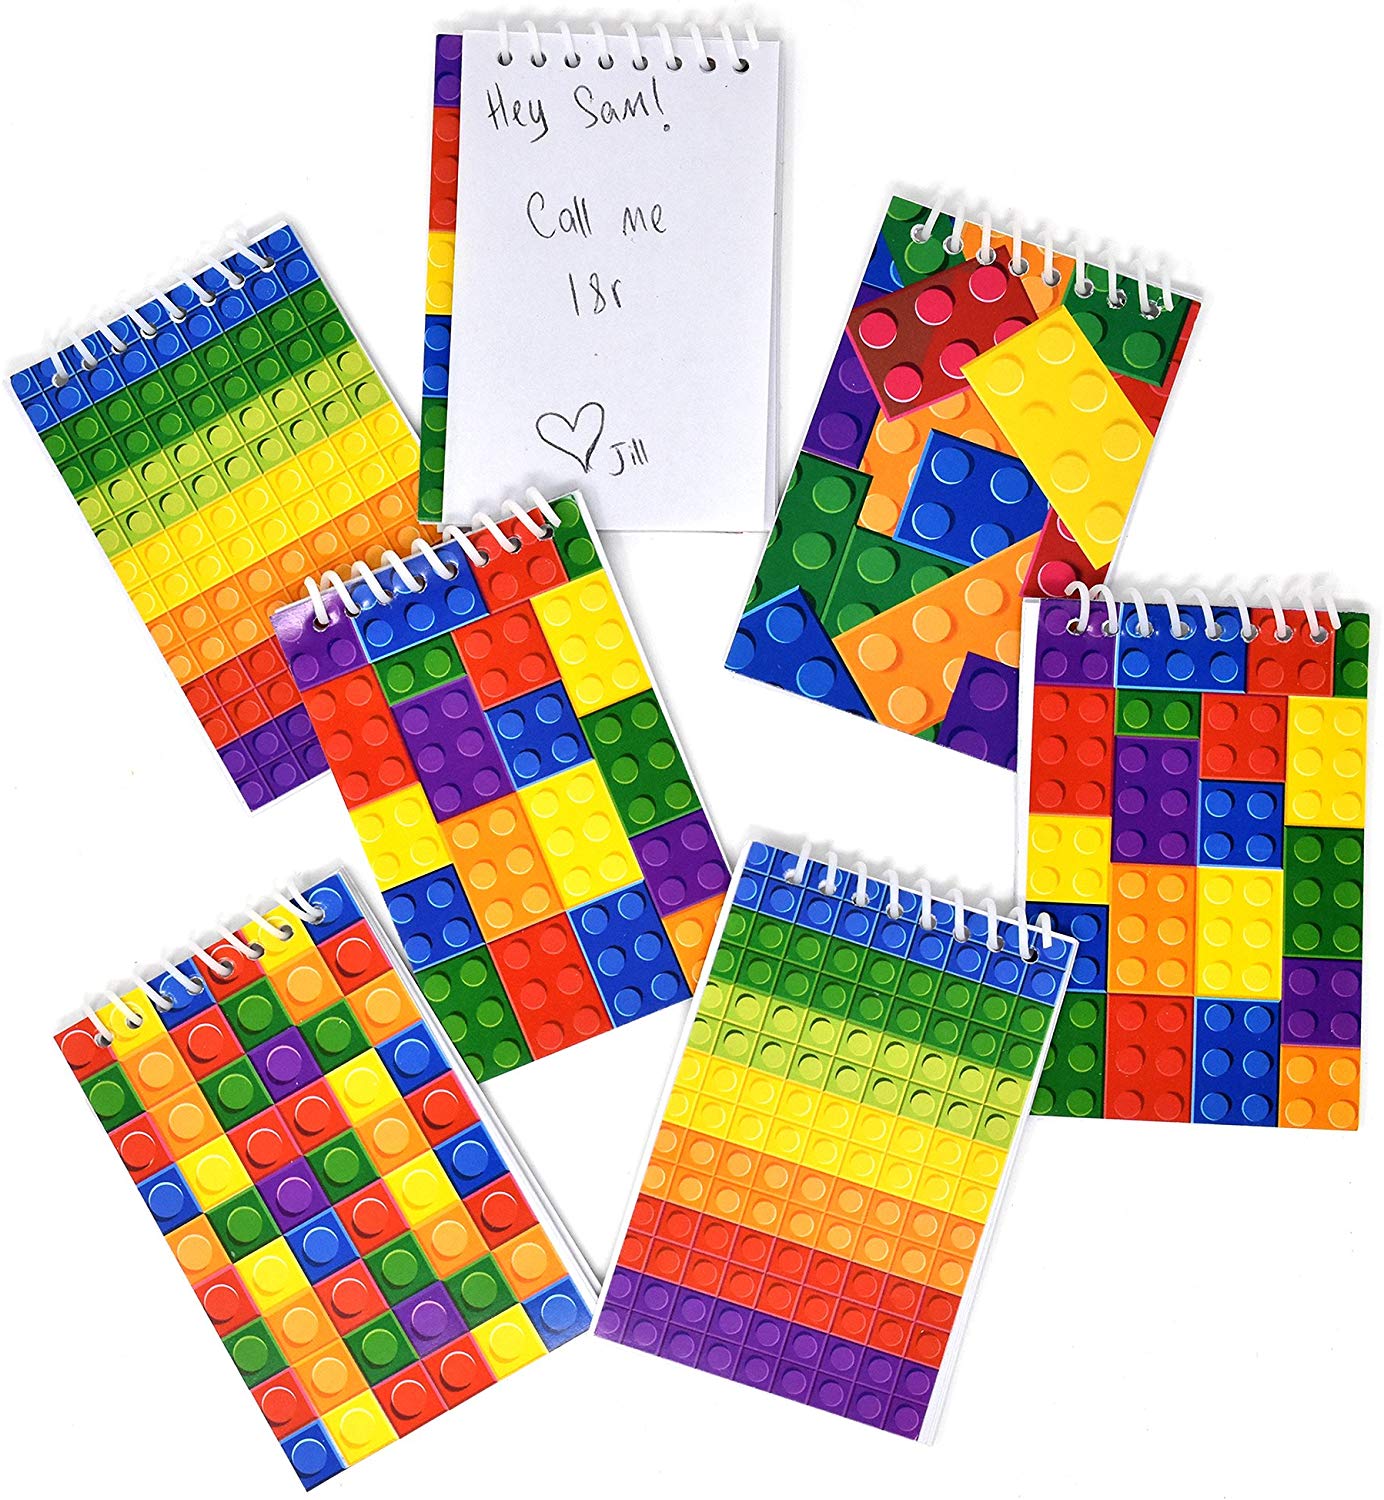 Mini notepads with LEGO brick themed covers